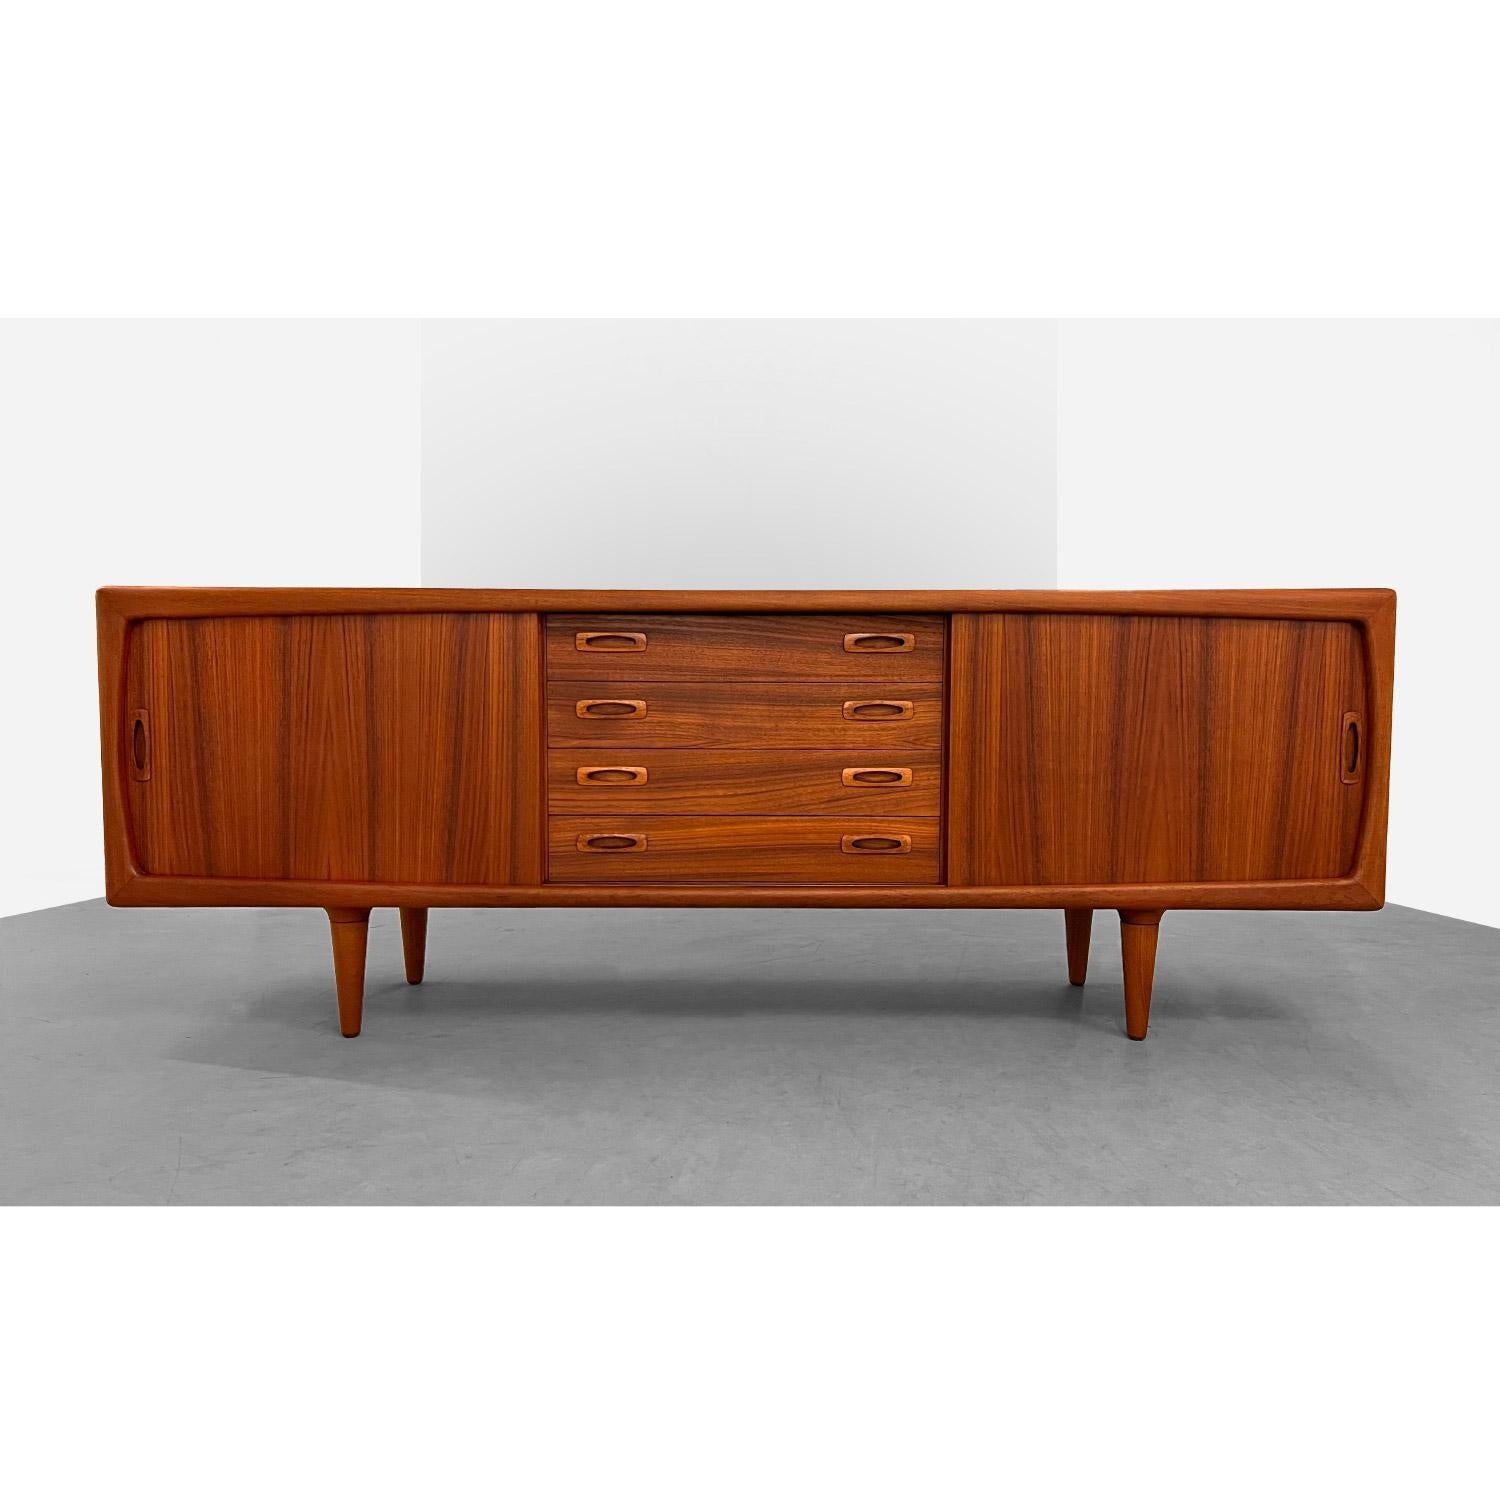 This vintage Danish teak sideboard by H.P. Hansen from the 1960's makes quite a statement at 87